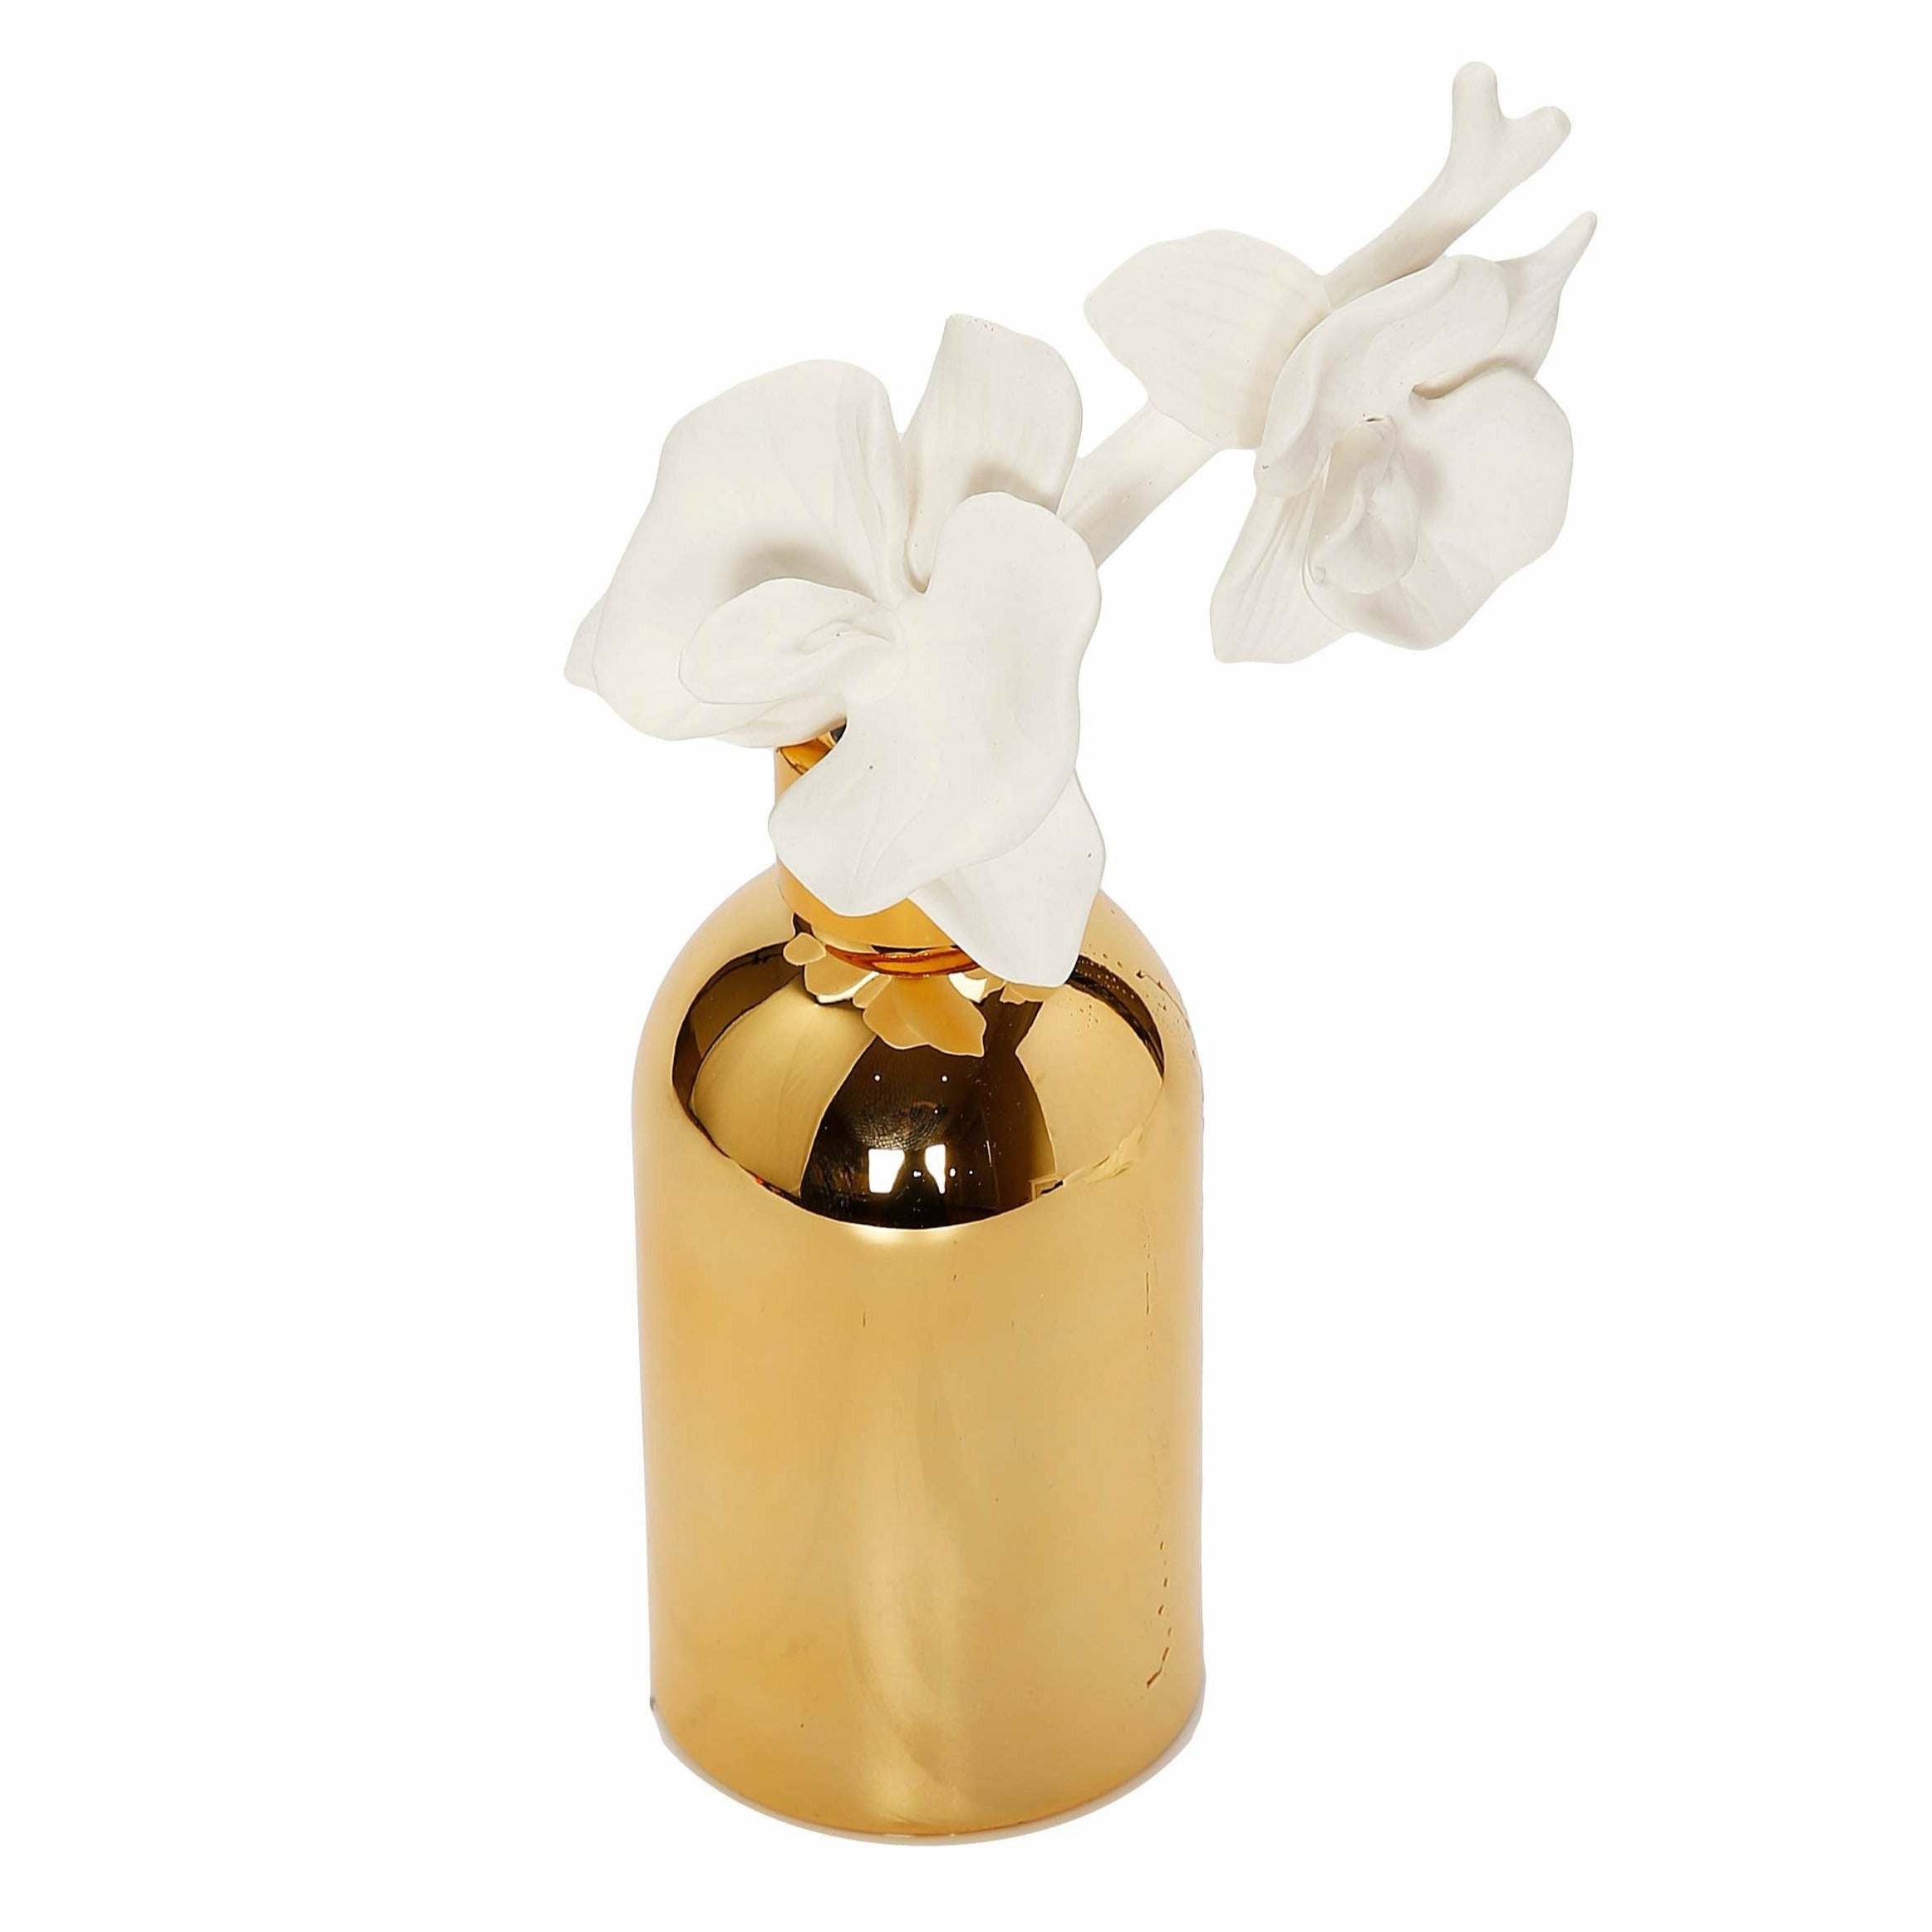 VIVIENCE Gold Bottle Diffuser with Gold Cap and White Flower, "English Pear & Freesia" Scent